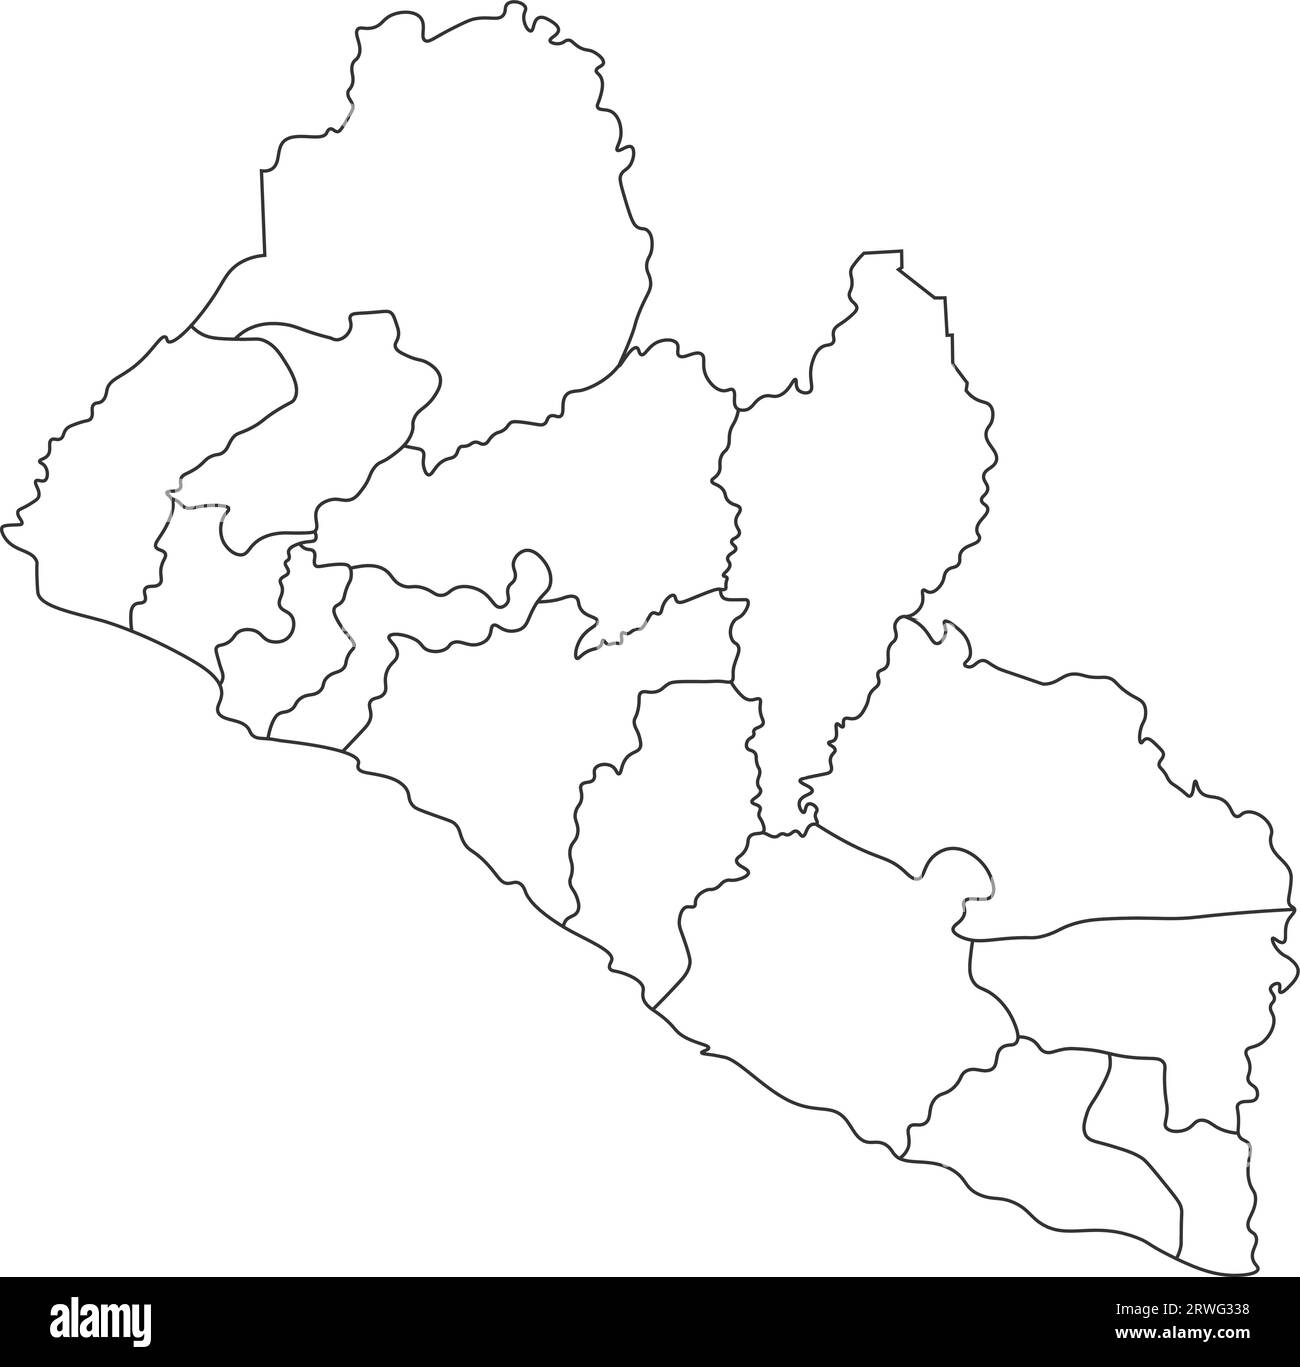 Vector isolated illustration of simplified administrative map Liberia. Borders of the counties. Black line silhouettes. White background Stock Vector